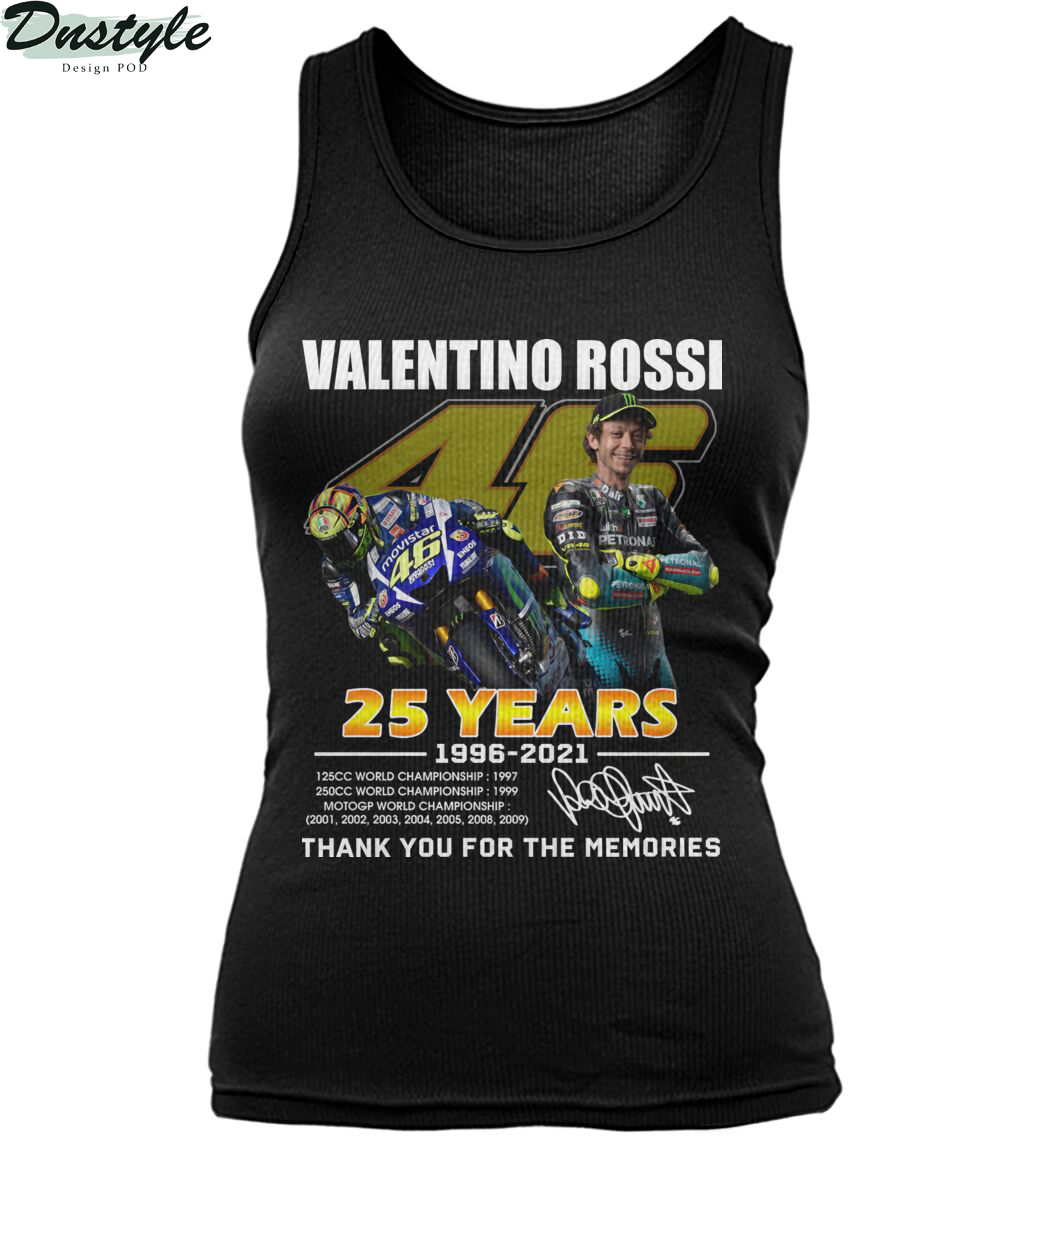 Valentino rossi 25 years thank you for the memories tank top